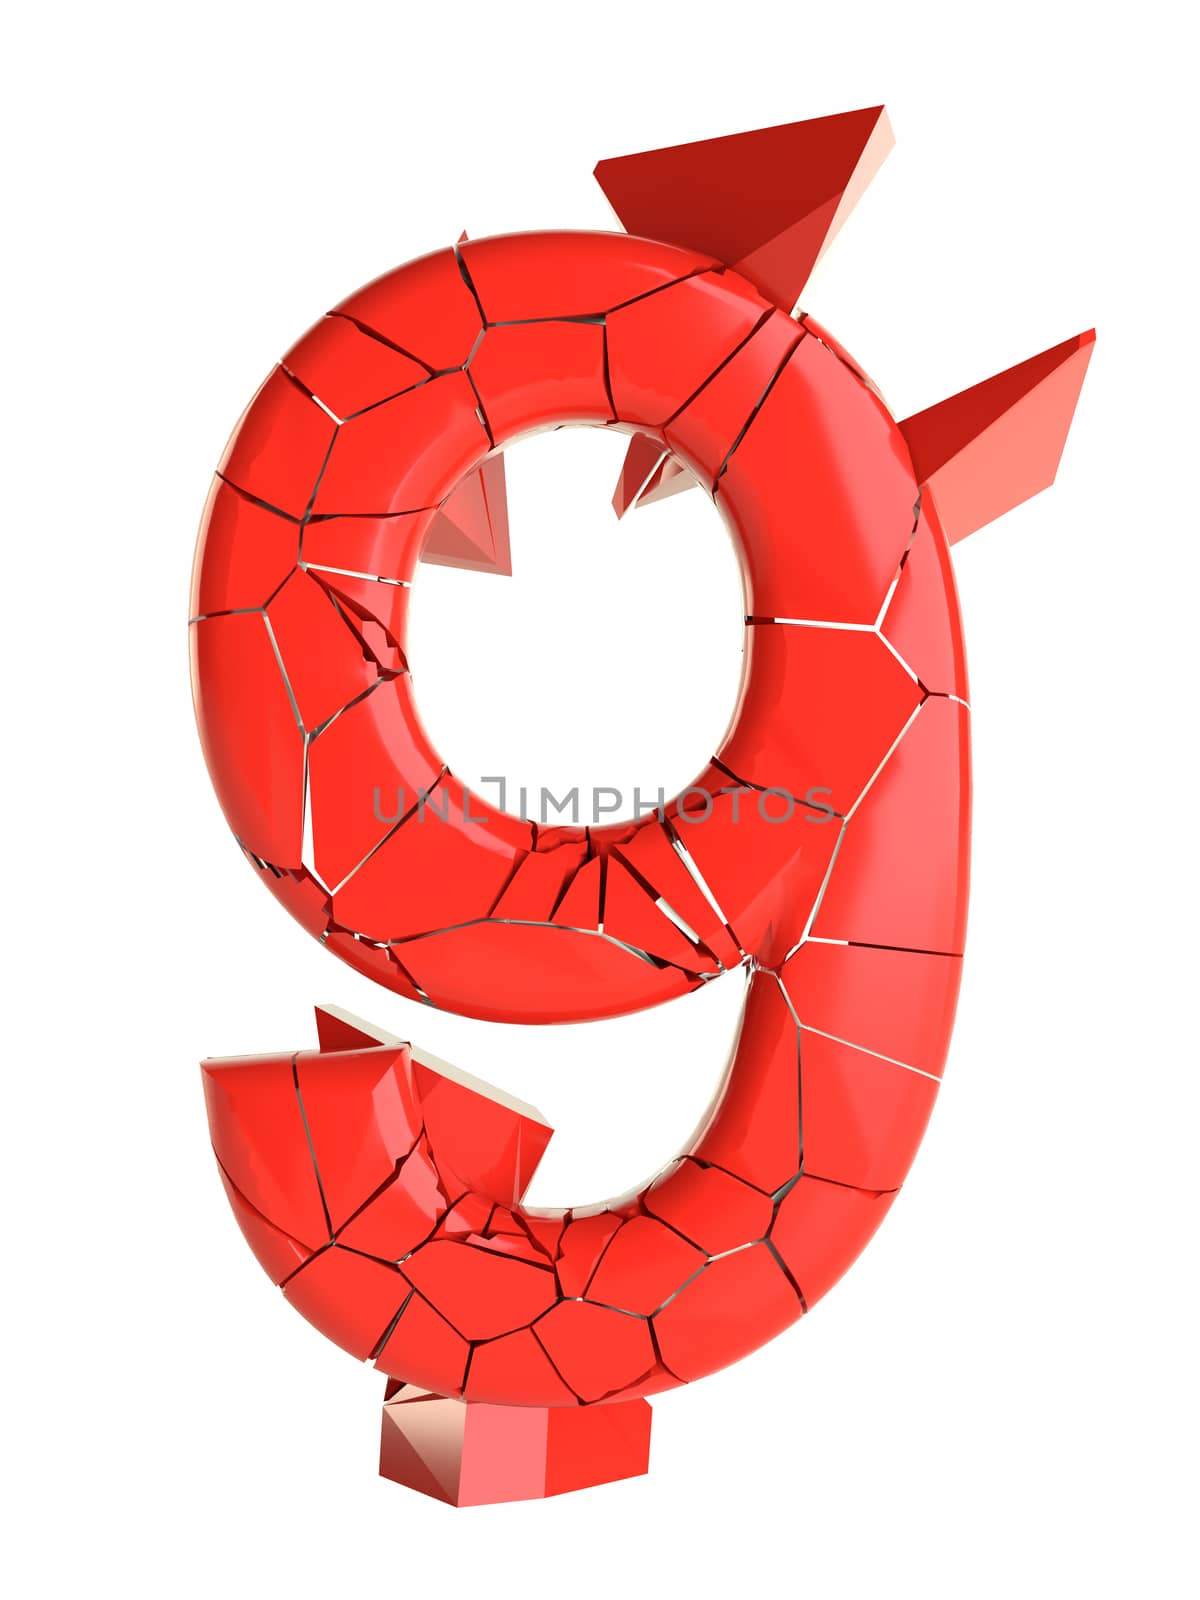 Futuristic red cracked number. Abstract font for your design. Isolated on white background. 3D illustration